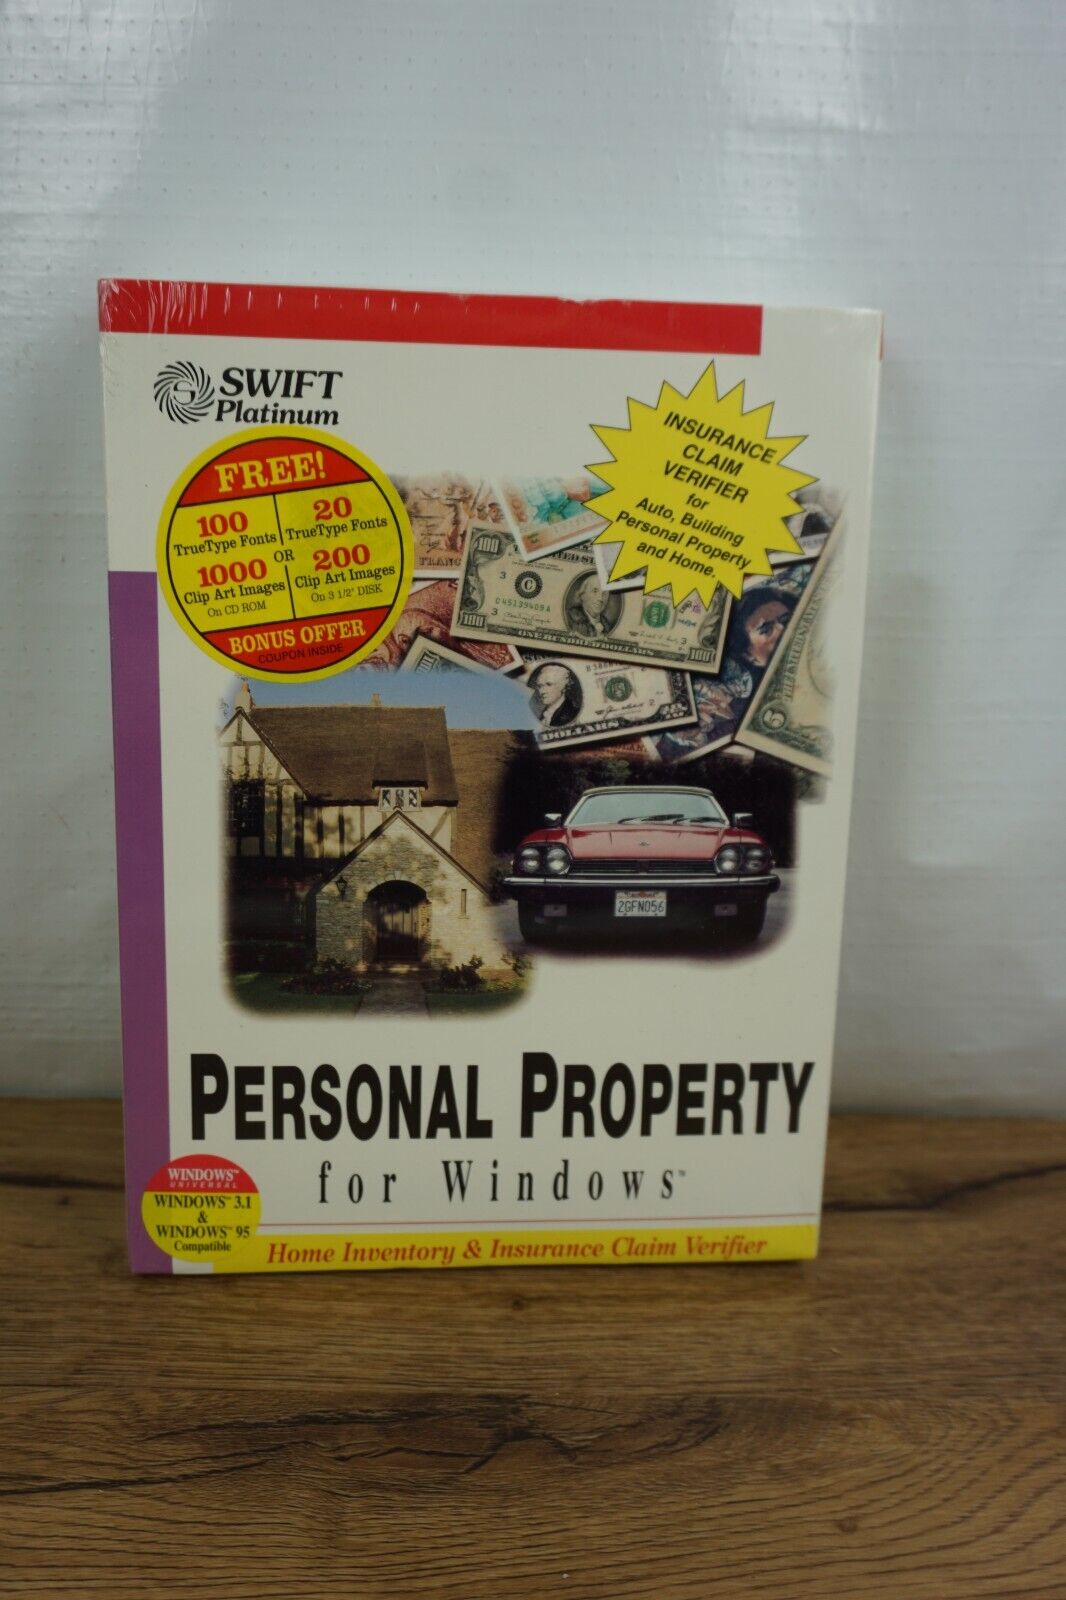 NEW SEALED - VINTAGE 1994 SWIFT PLATINUM PERSONAL PROPERTY FOR WINDOWS 95 HOME